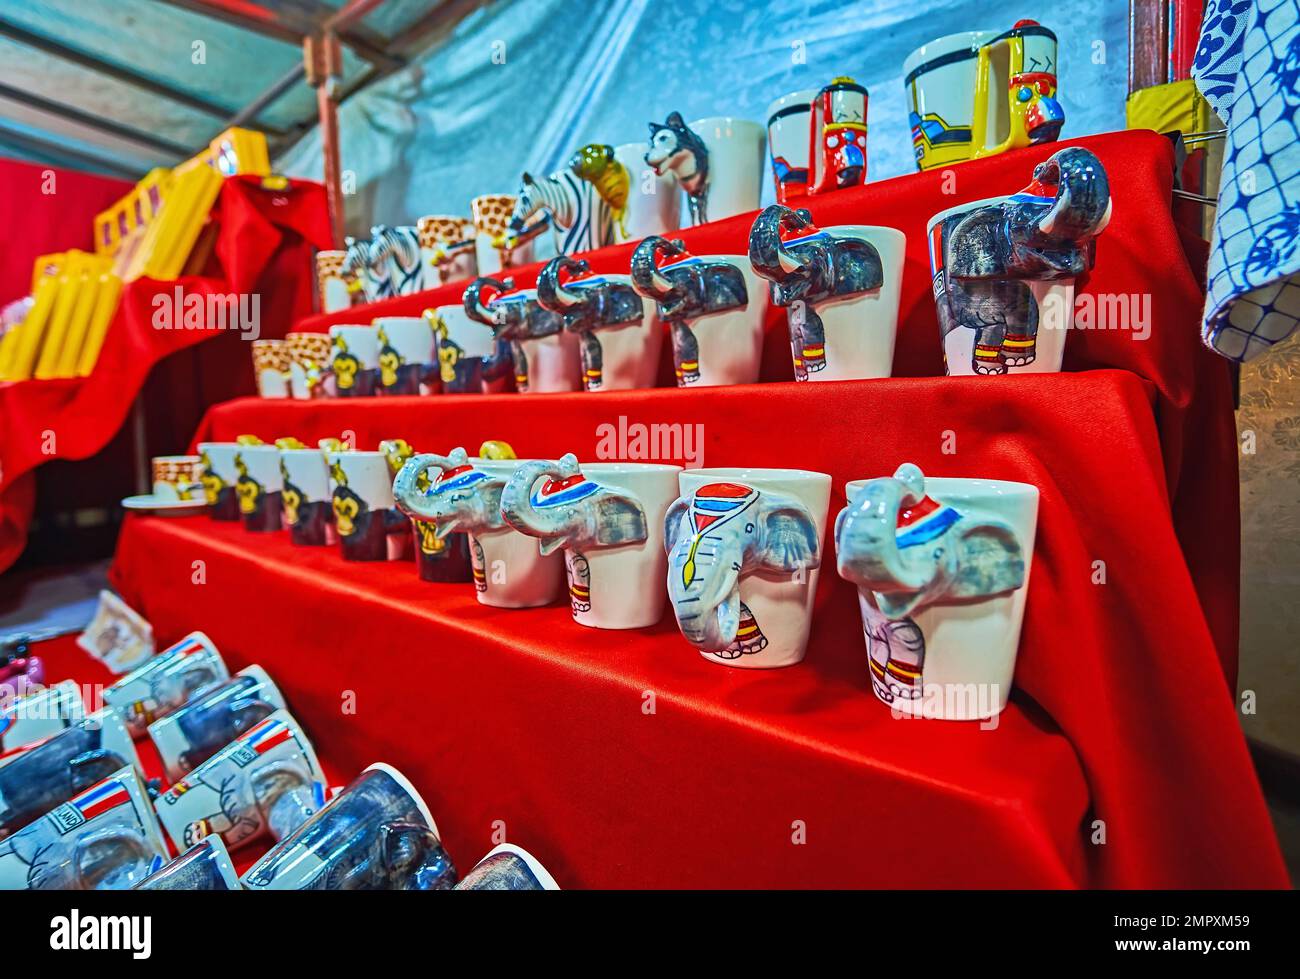 The line of porcelain mugs, decorated with elephants, monkeys, dogs and painted tuk tuks in stall of the Night Market in Chiang Mai, Thailand Stock Photo